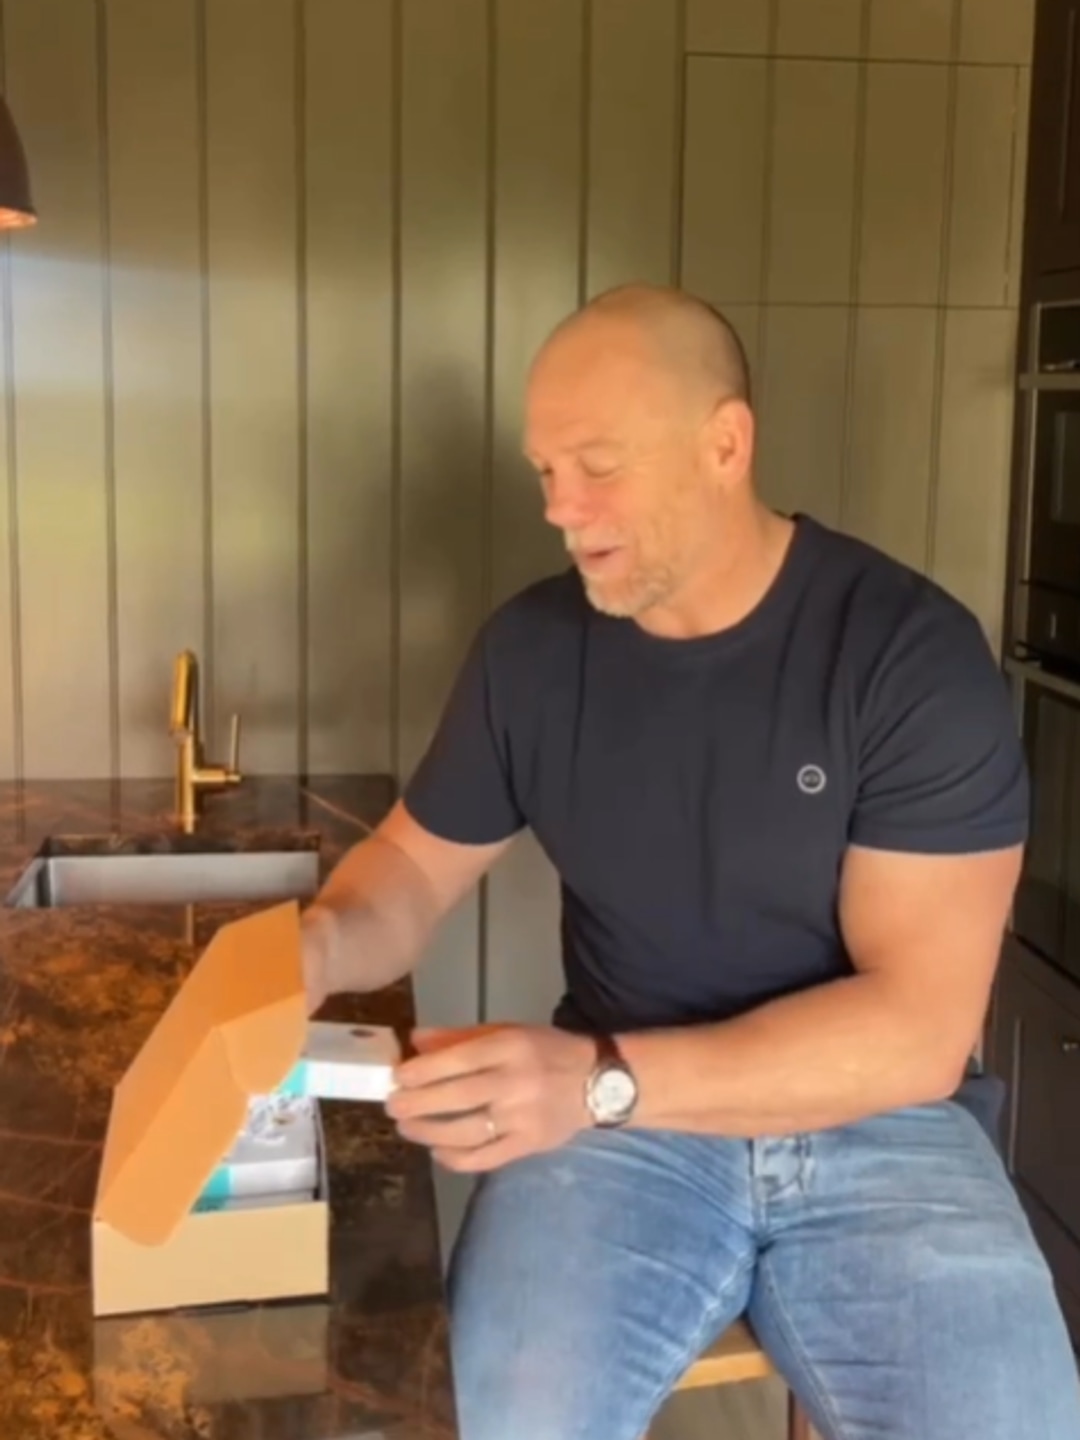 Mike Tindall films inside their kitchen at home